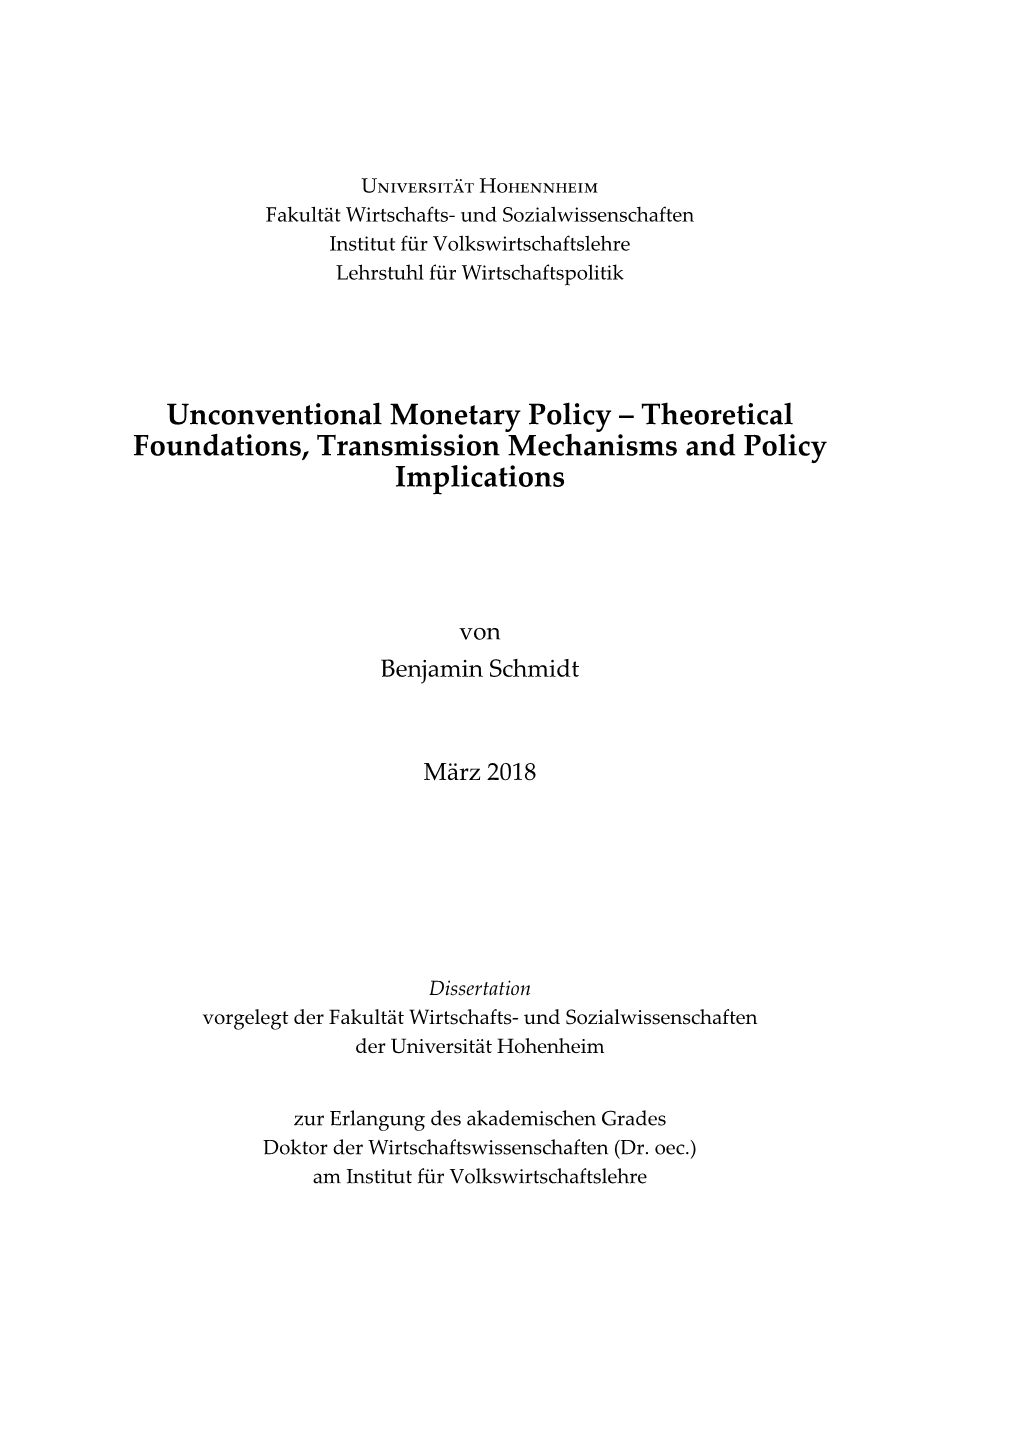 Unconventional Monetary Policy – Theoretical Foundations, Transmission Mechanisms and Policy Implications